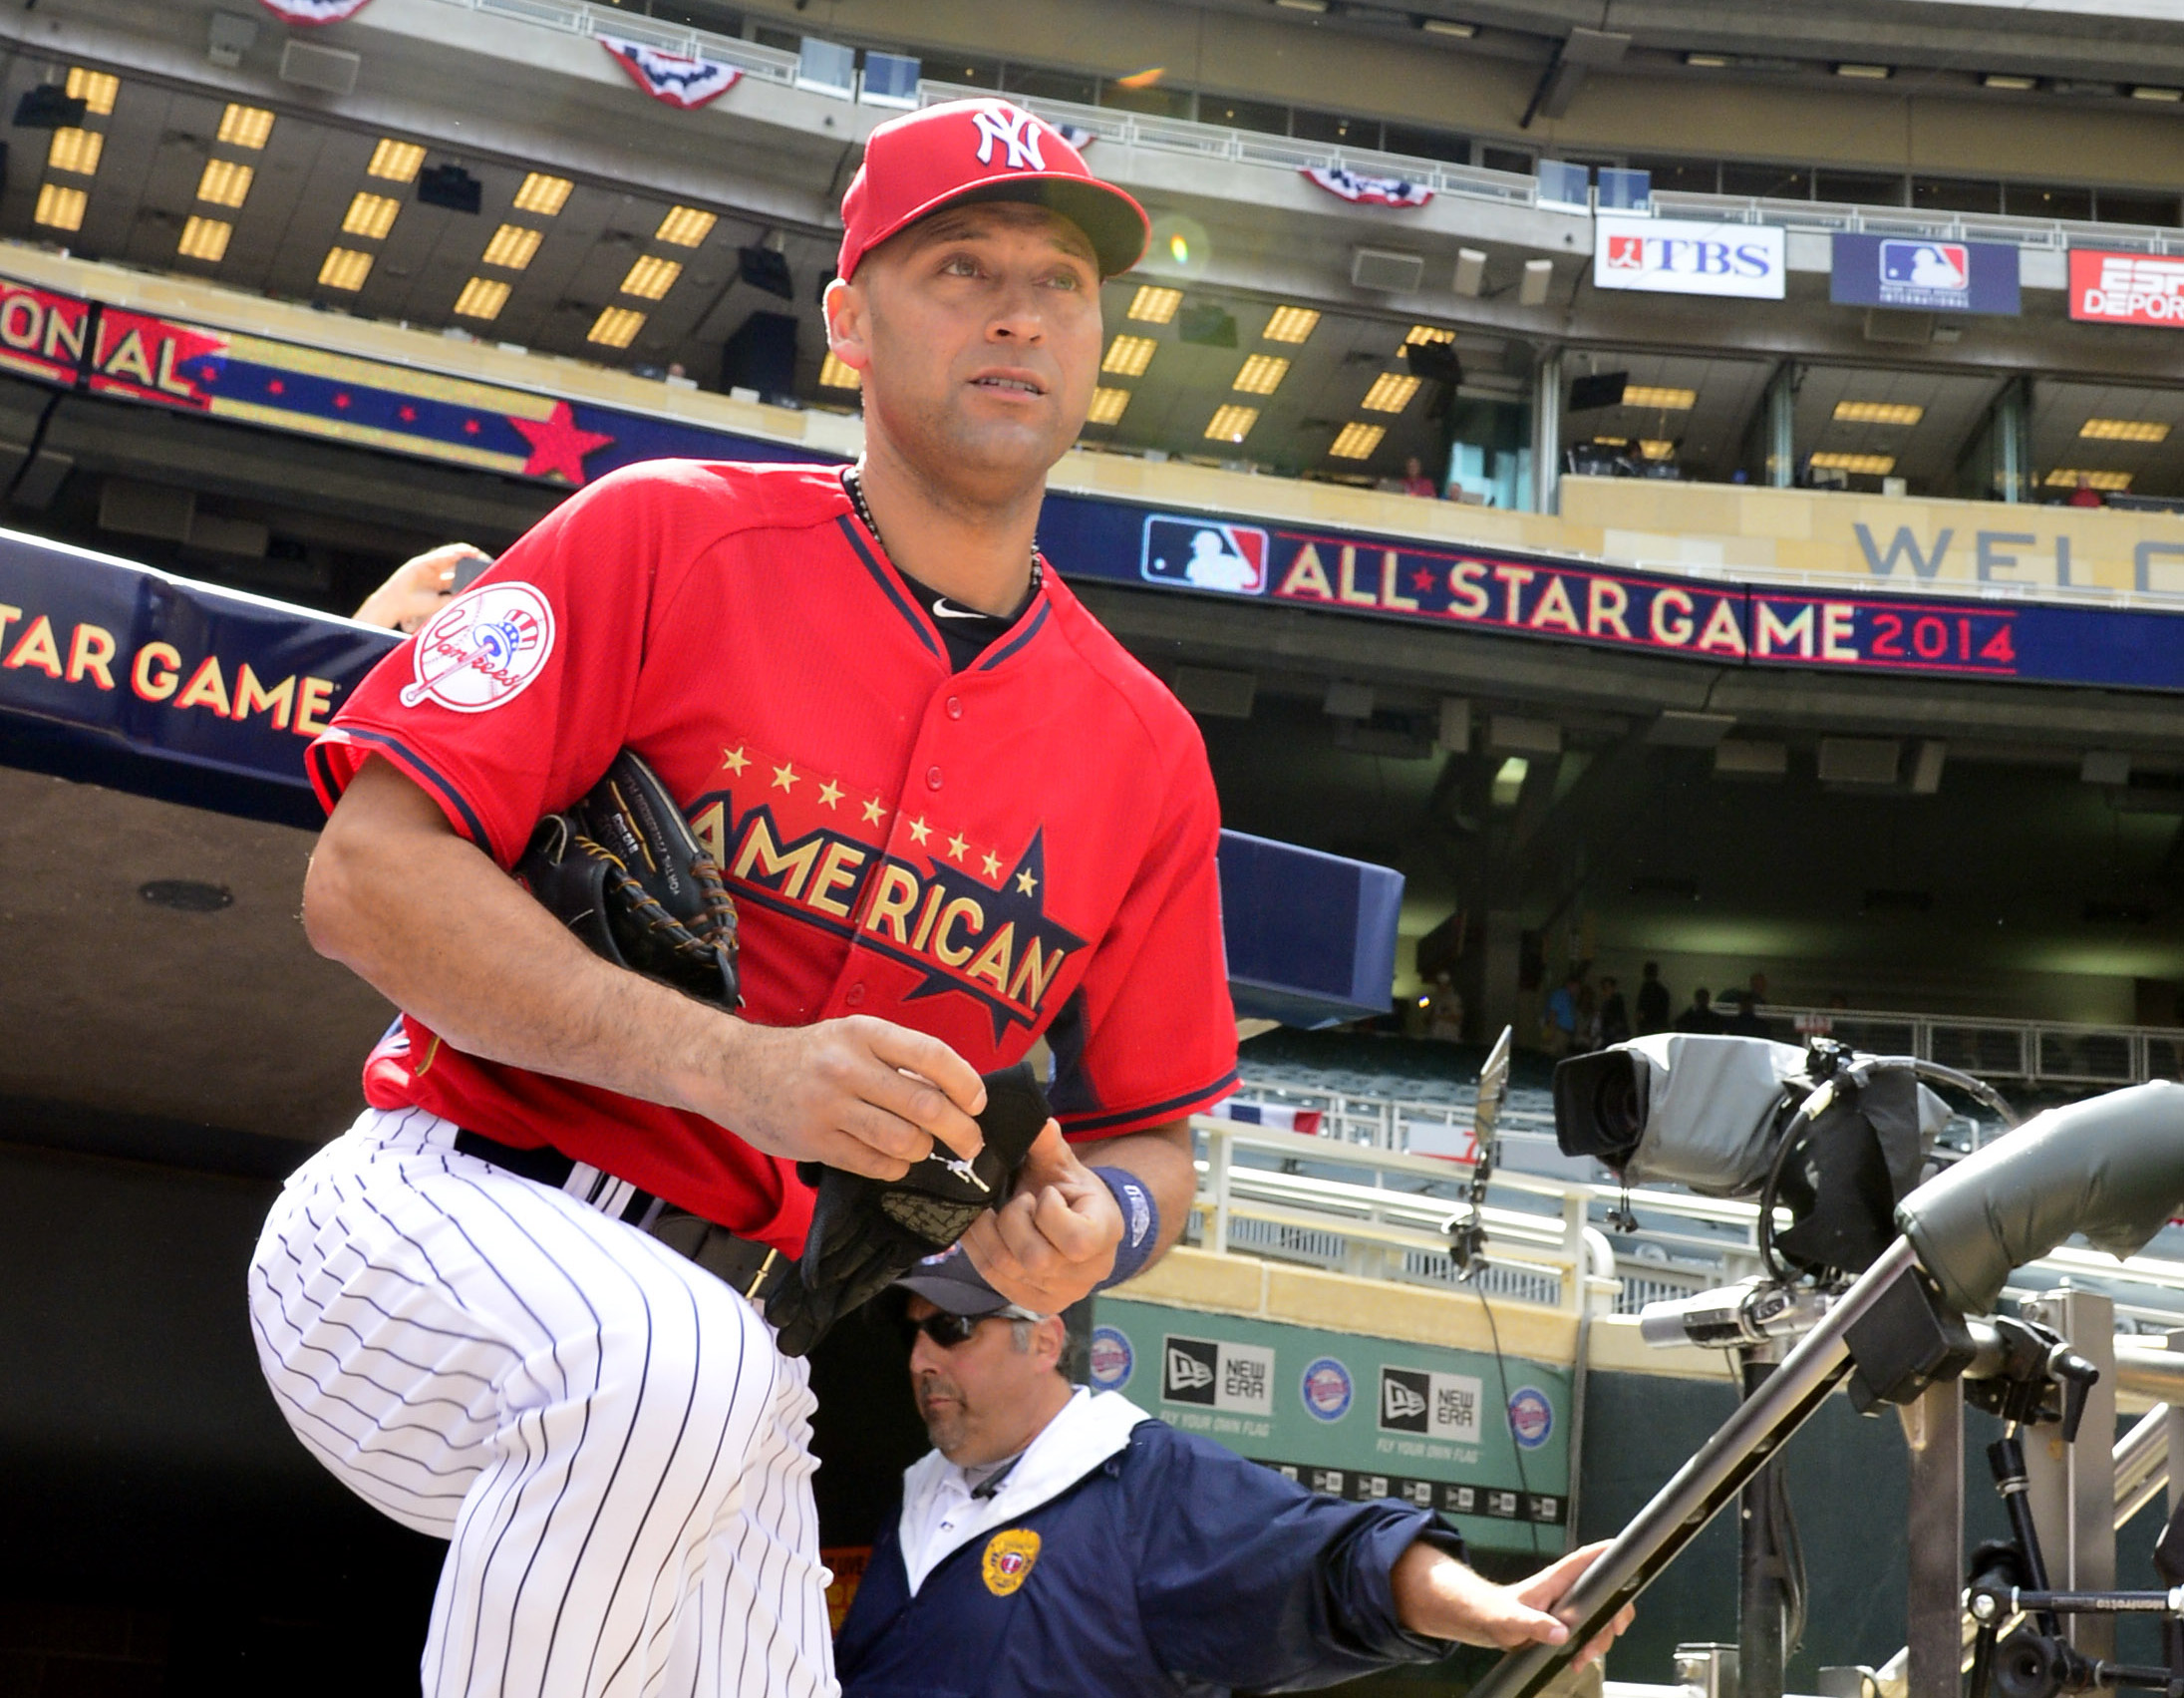 Derek Jeter will bat leadoff for the AL in his 15th All-Star Game. (Scott Rovak, USA TODAY Sports)